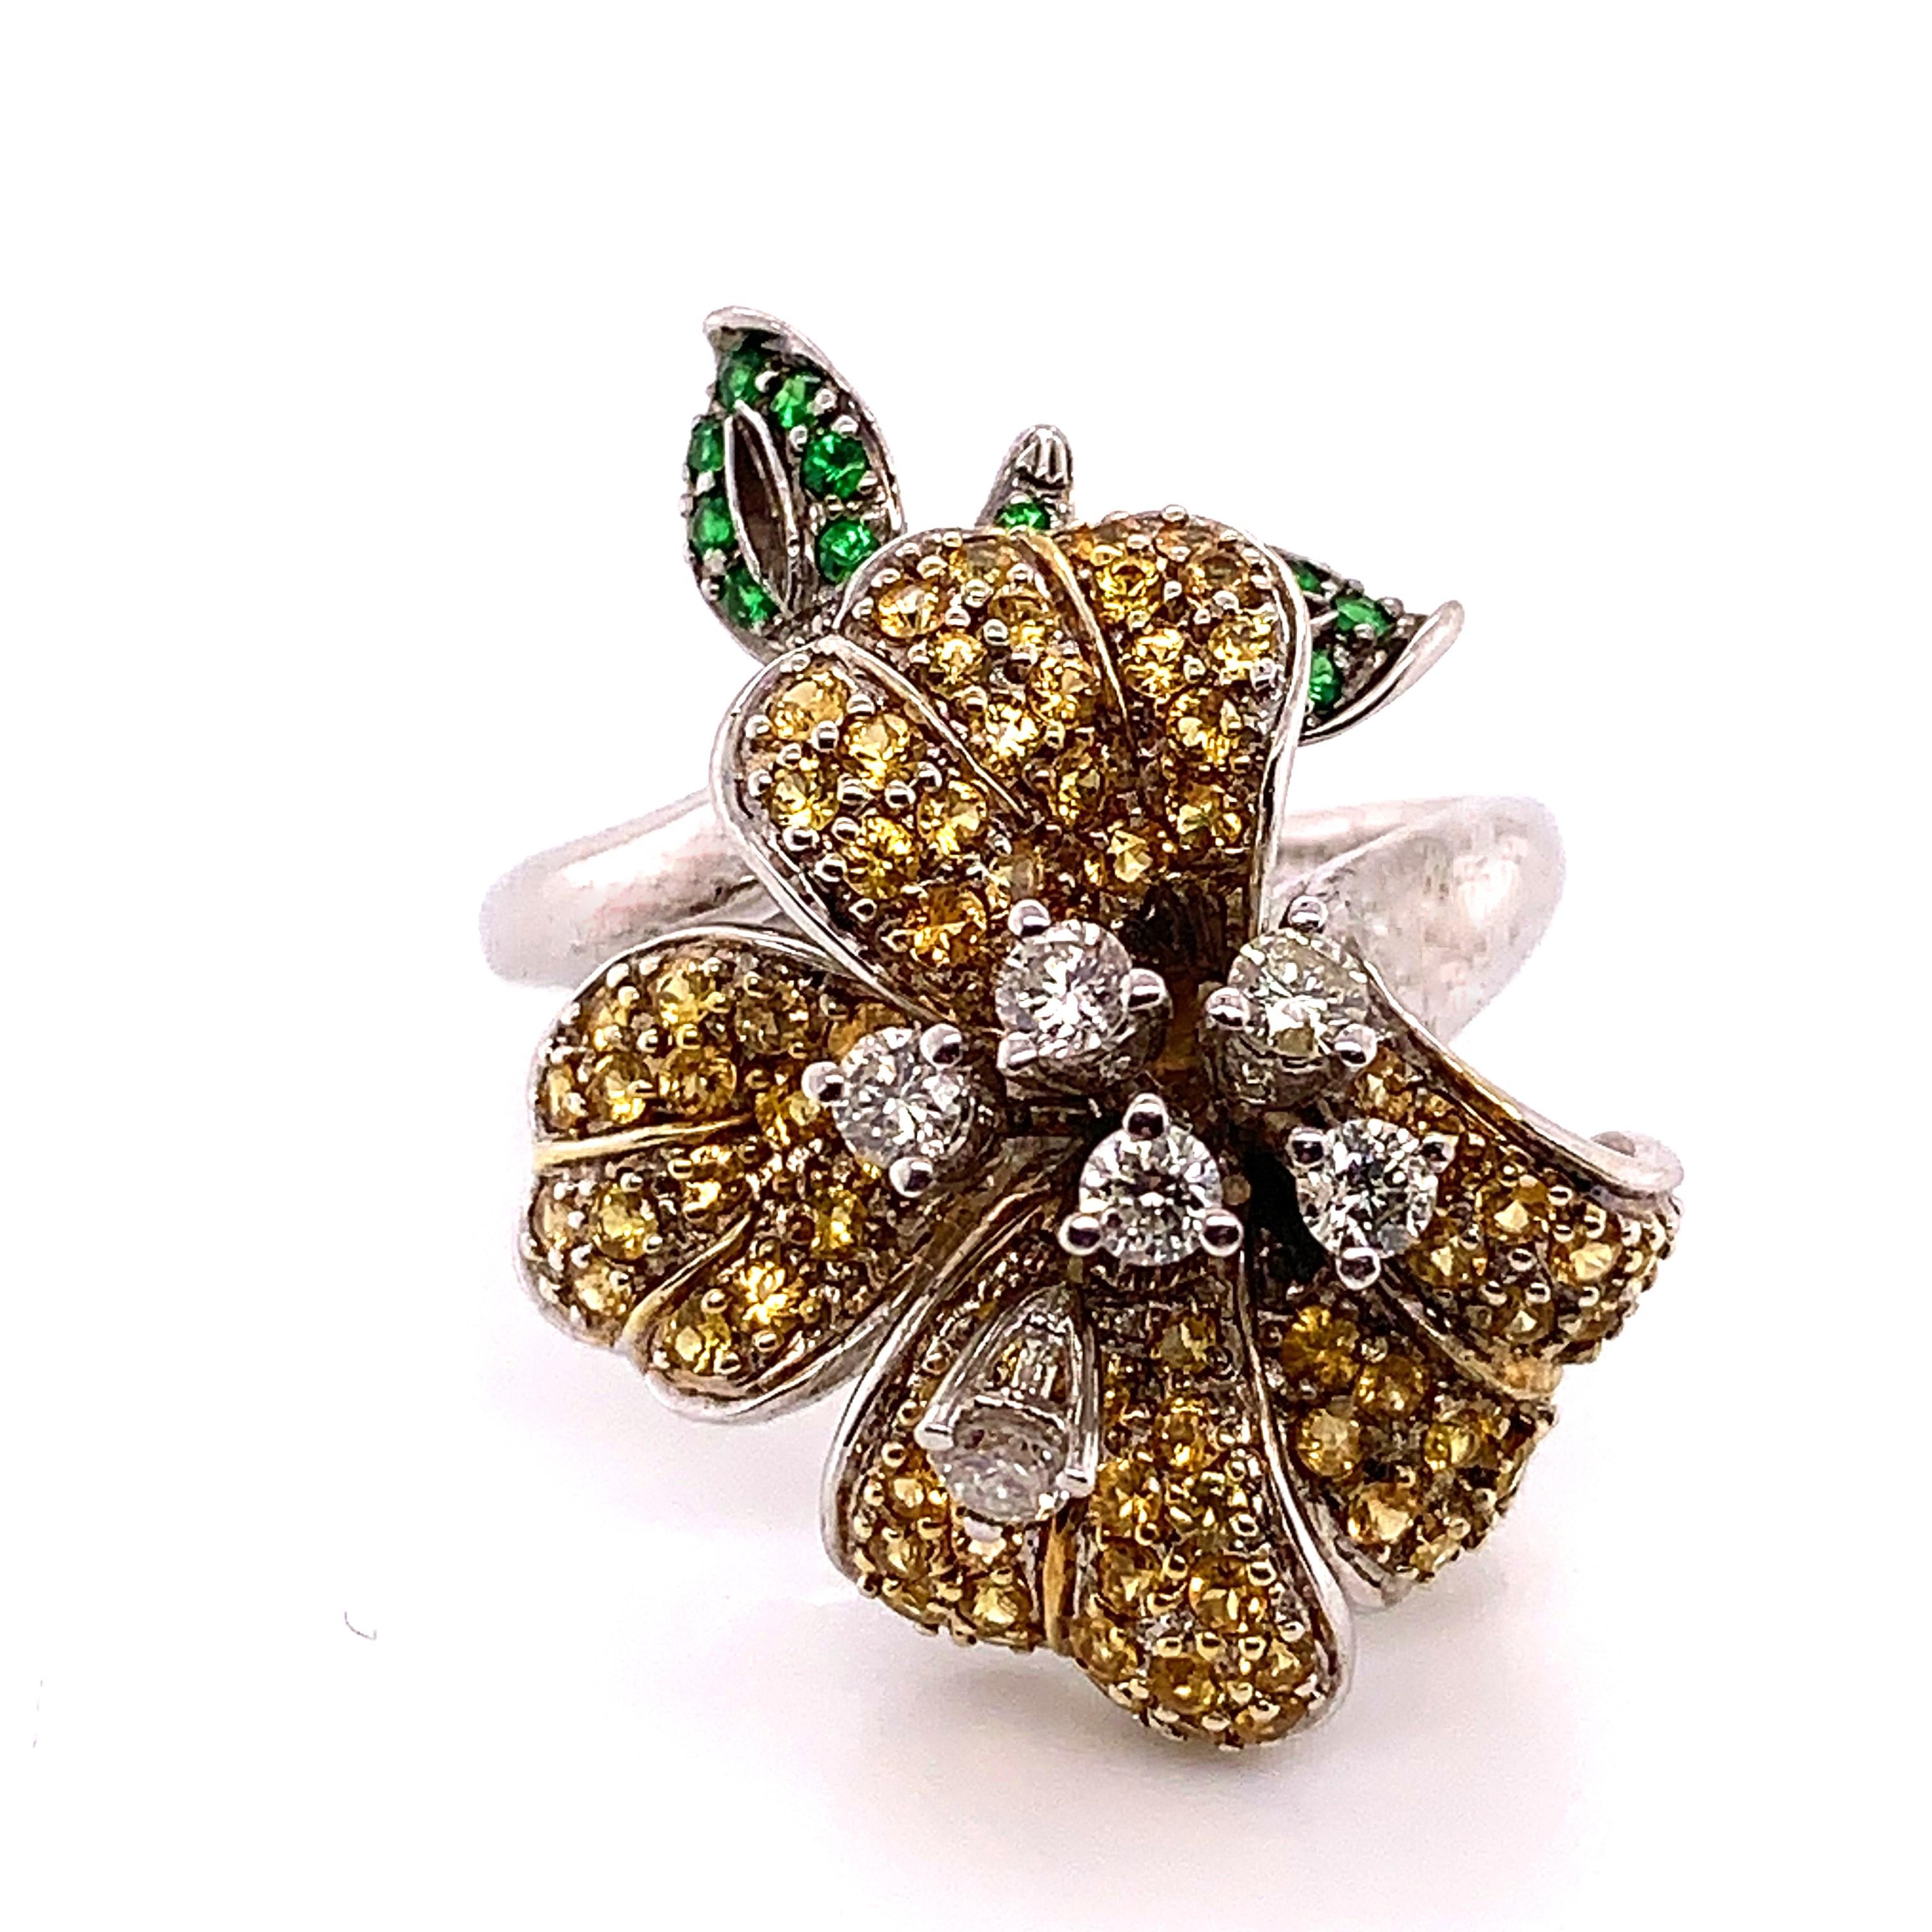 The joy derived from this beautiful ring from nature will simply delight you as you wear it. 
Our one of a kind ring made by Shimon's Creations features 1.83 Carats of Yellow Sapphire, Green Tsavorite and Diamond stones. The yellow sapphire and